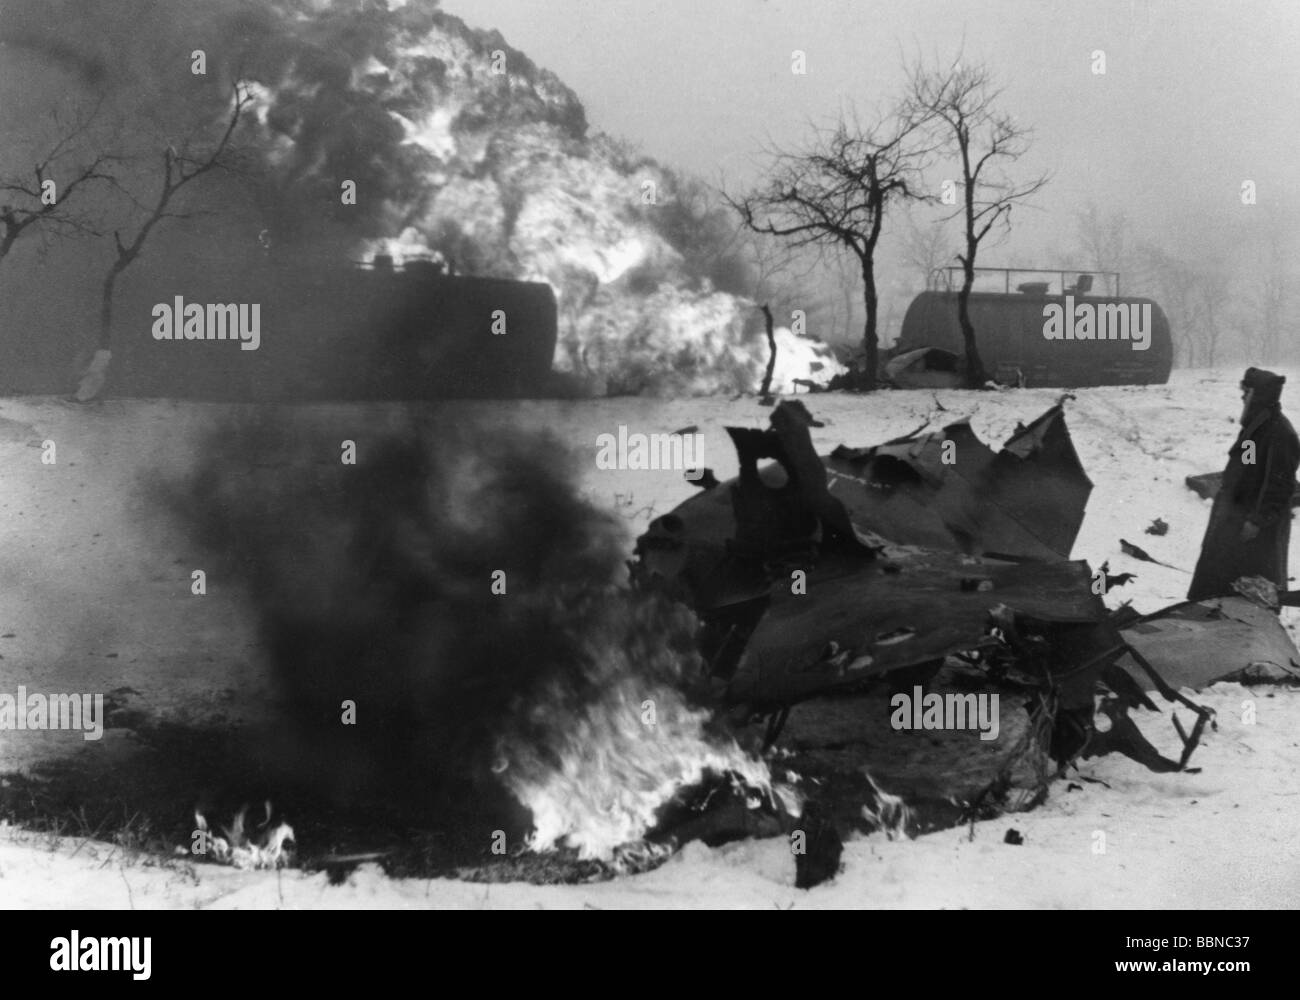 events, Second World War / WWII, Russia 1942 / 1943, burning petrol train at Stalino, January 1943, 20th century, historic, historical, fire, Soviet Union, USSR, tank waggon, waggons, railway, train, Third Reich, Donets Basin, people, 1940s, Stock Photo